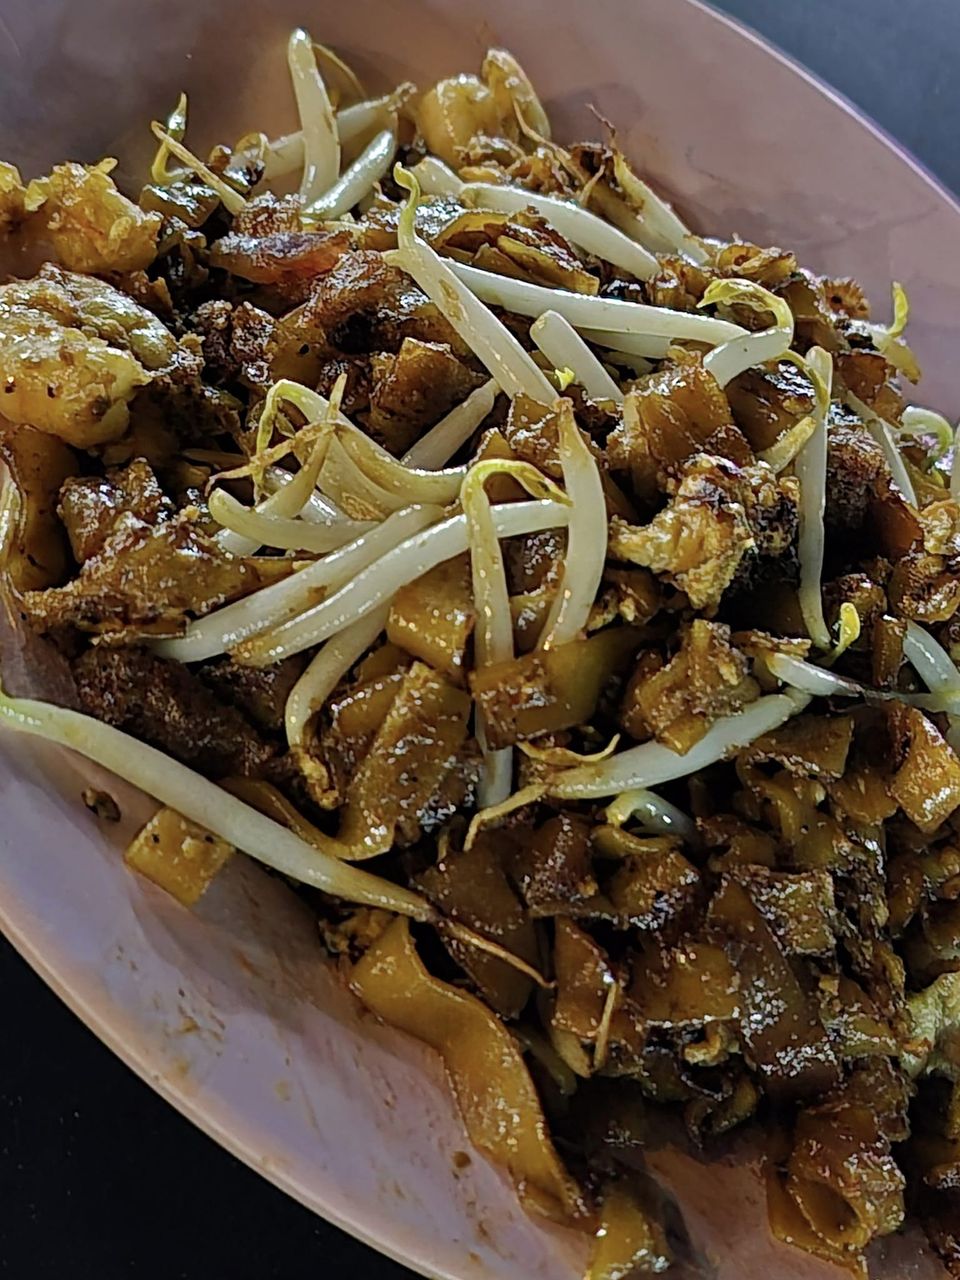 Ming Qing Duck Egg Char Koay Teow is Good